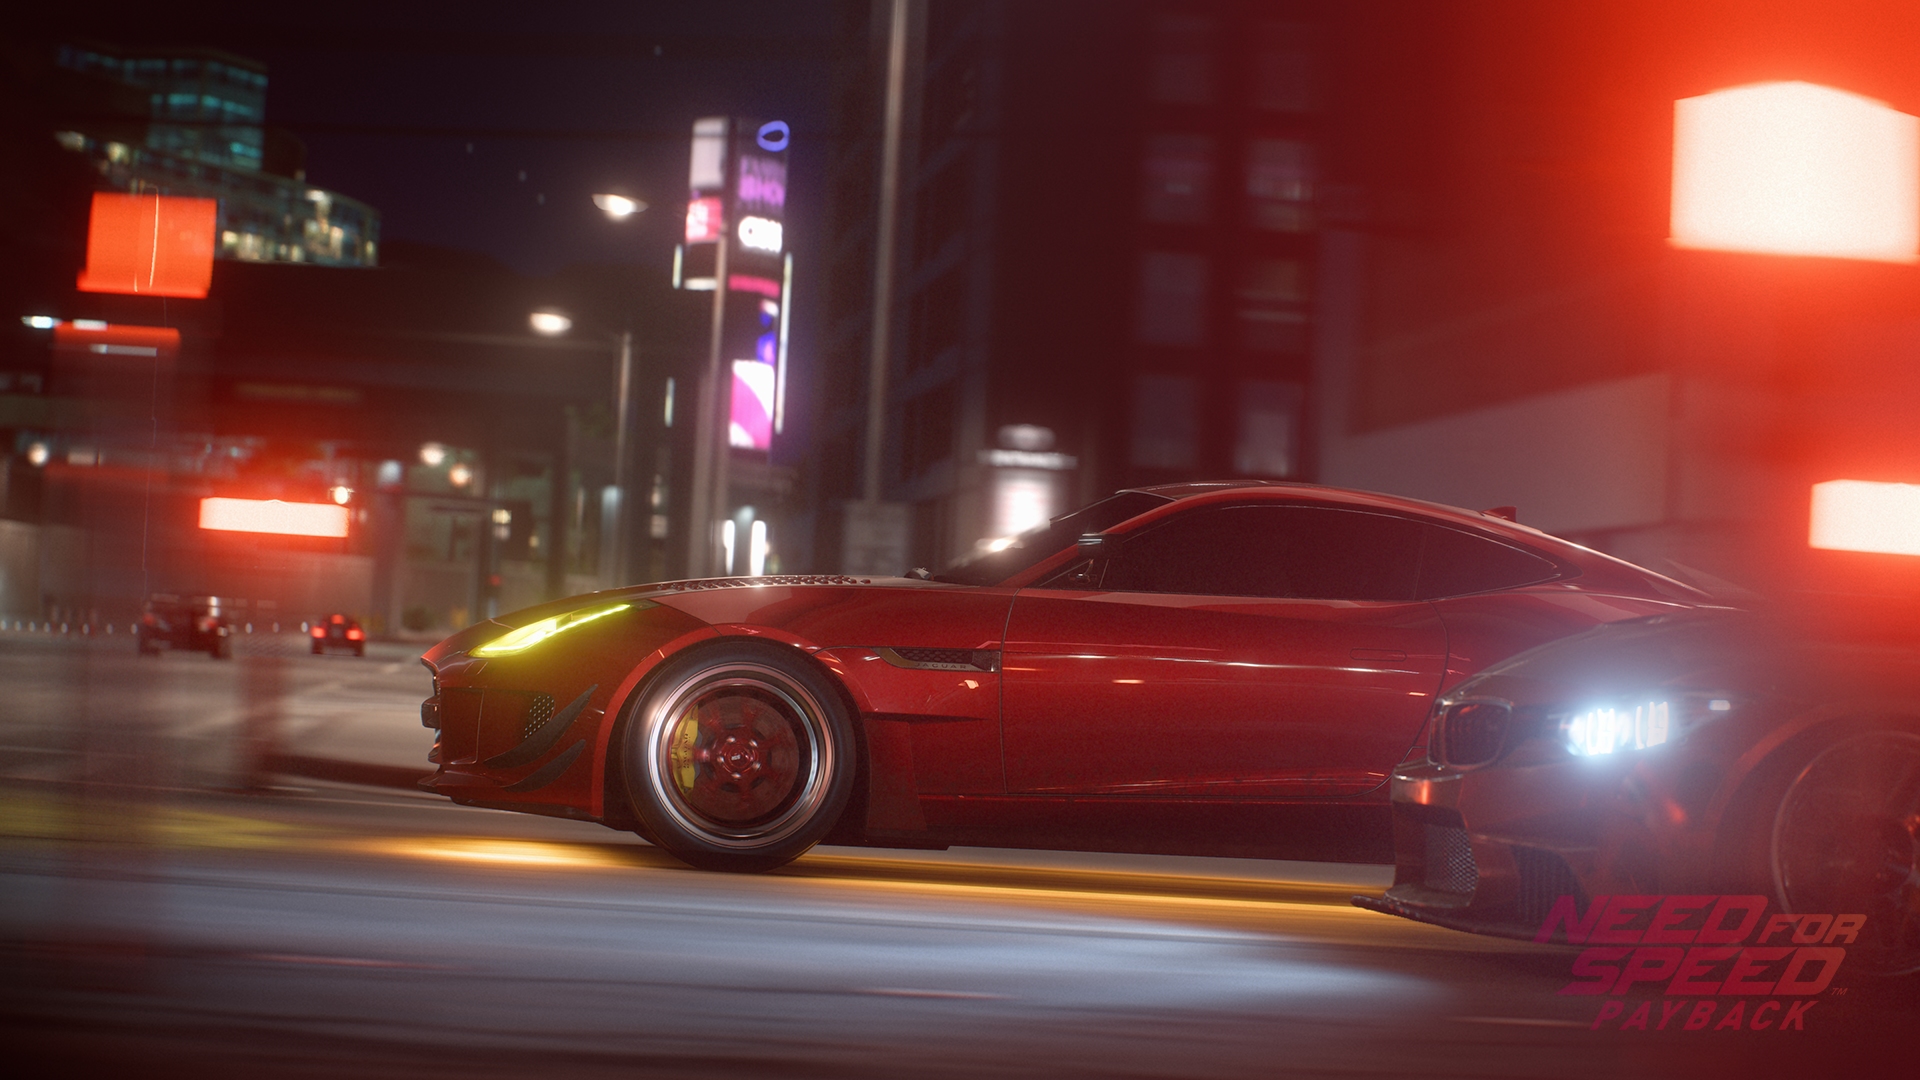 Video Game Need for Speed Payback HD Wallpaper | Background Image